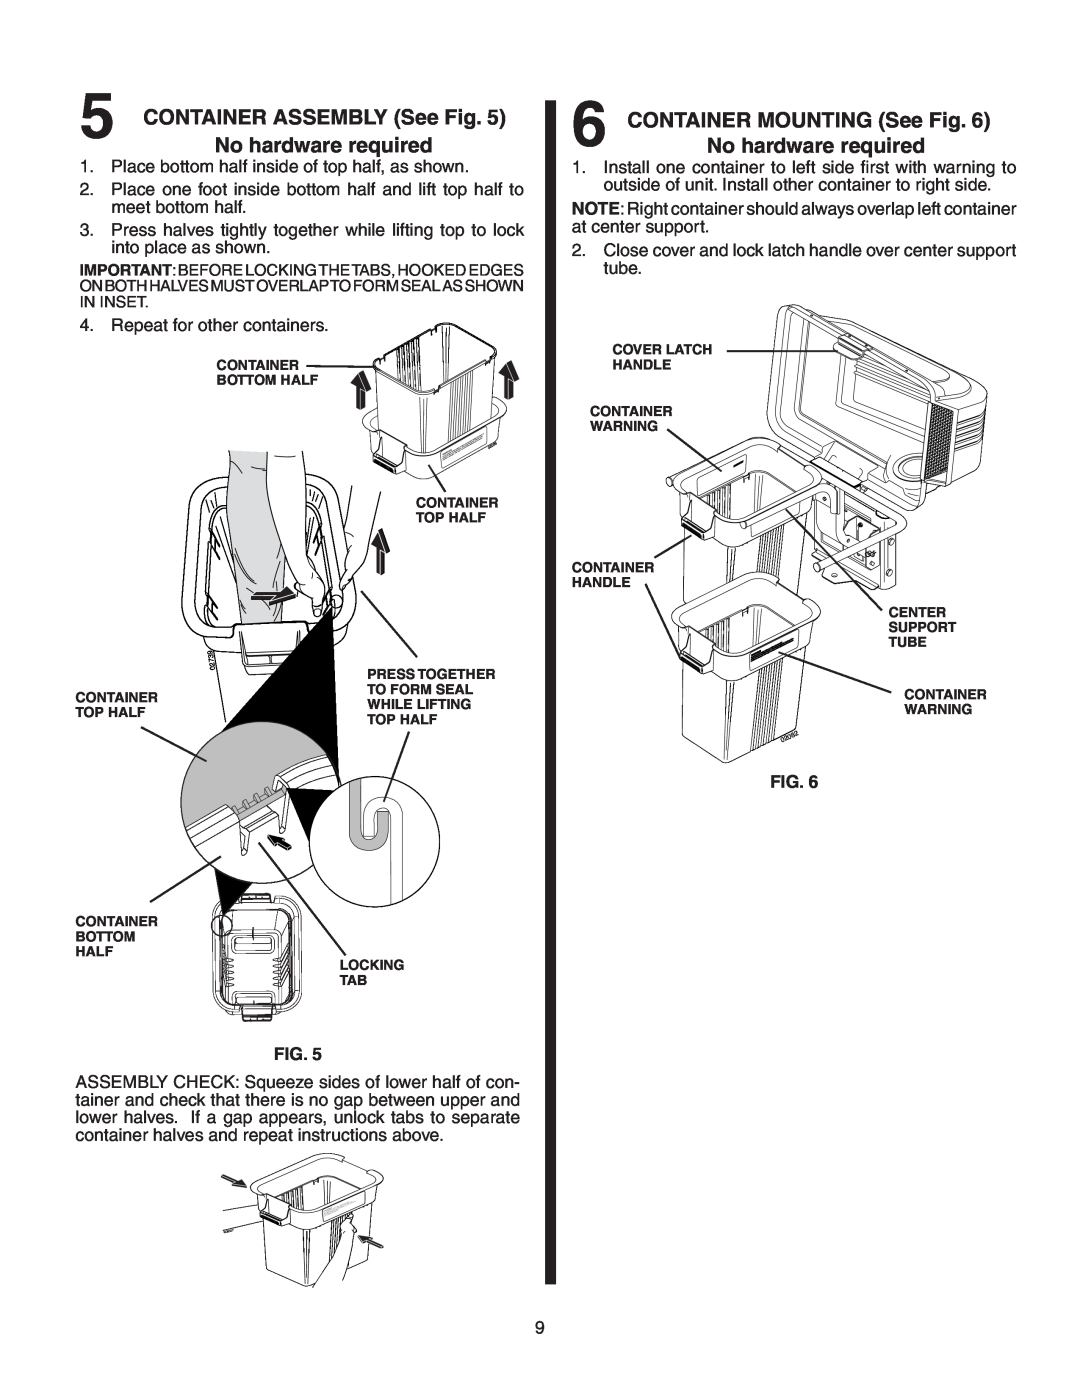 Poulan C342B, 954 04 05-03, 156235 owner manual CONTAINER ASSEMBLY See Fig, No hardware required, CONTAINER MOUNTING See Fig 